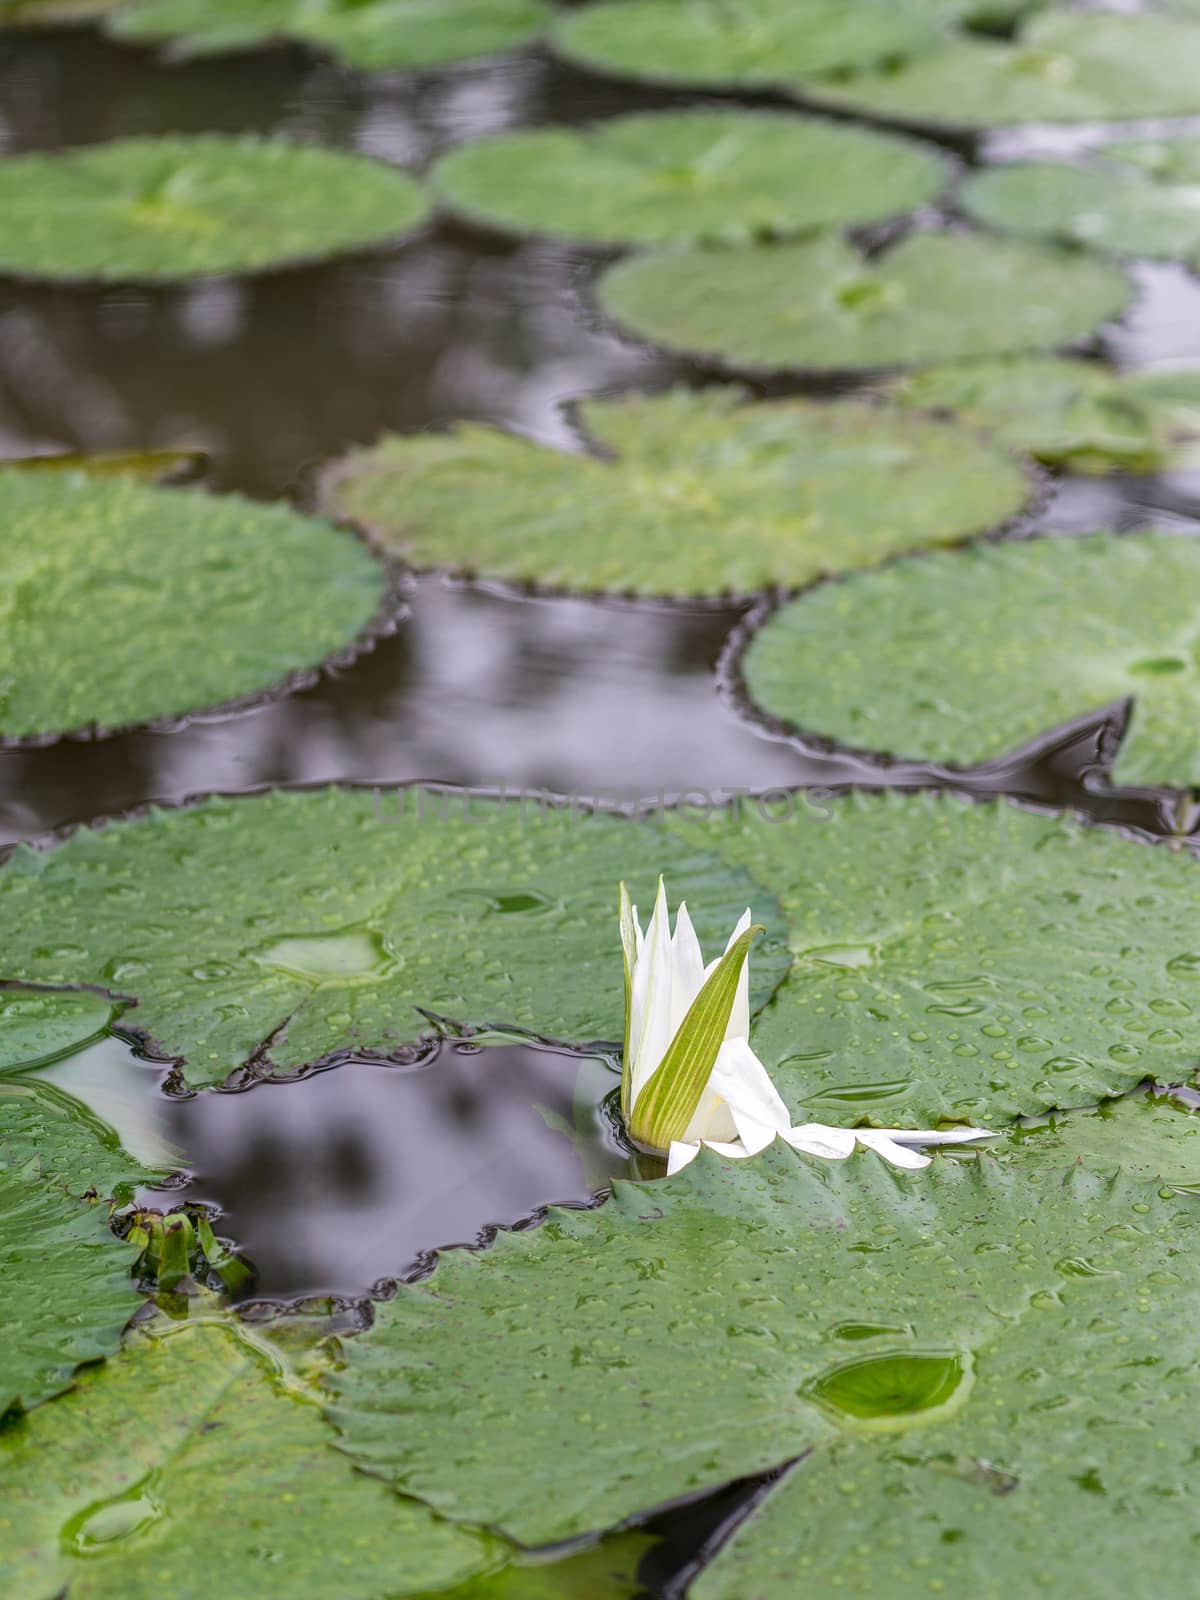 Beautiful white flower and broad leaves of the White Lotus, also known as the European white waterlily or the white water rose, floating in a small pond at the Bamako Zoo in Mali